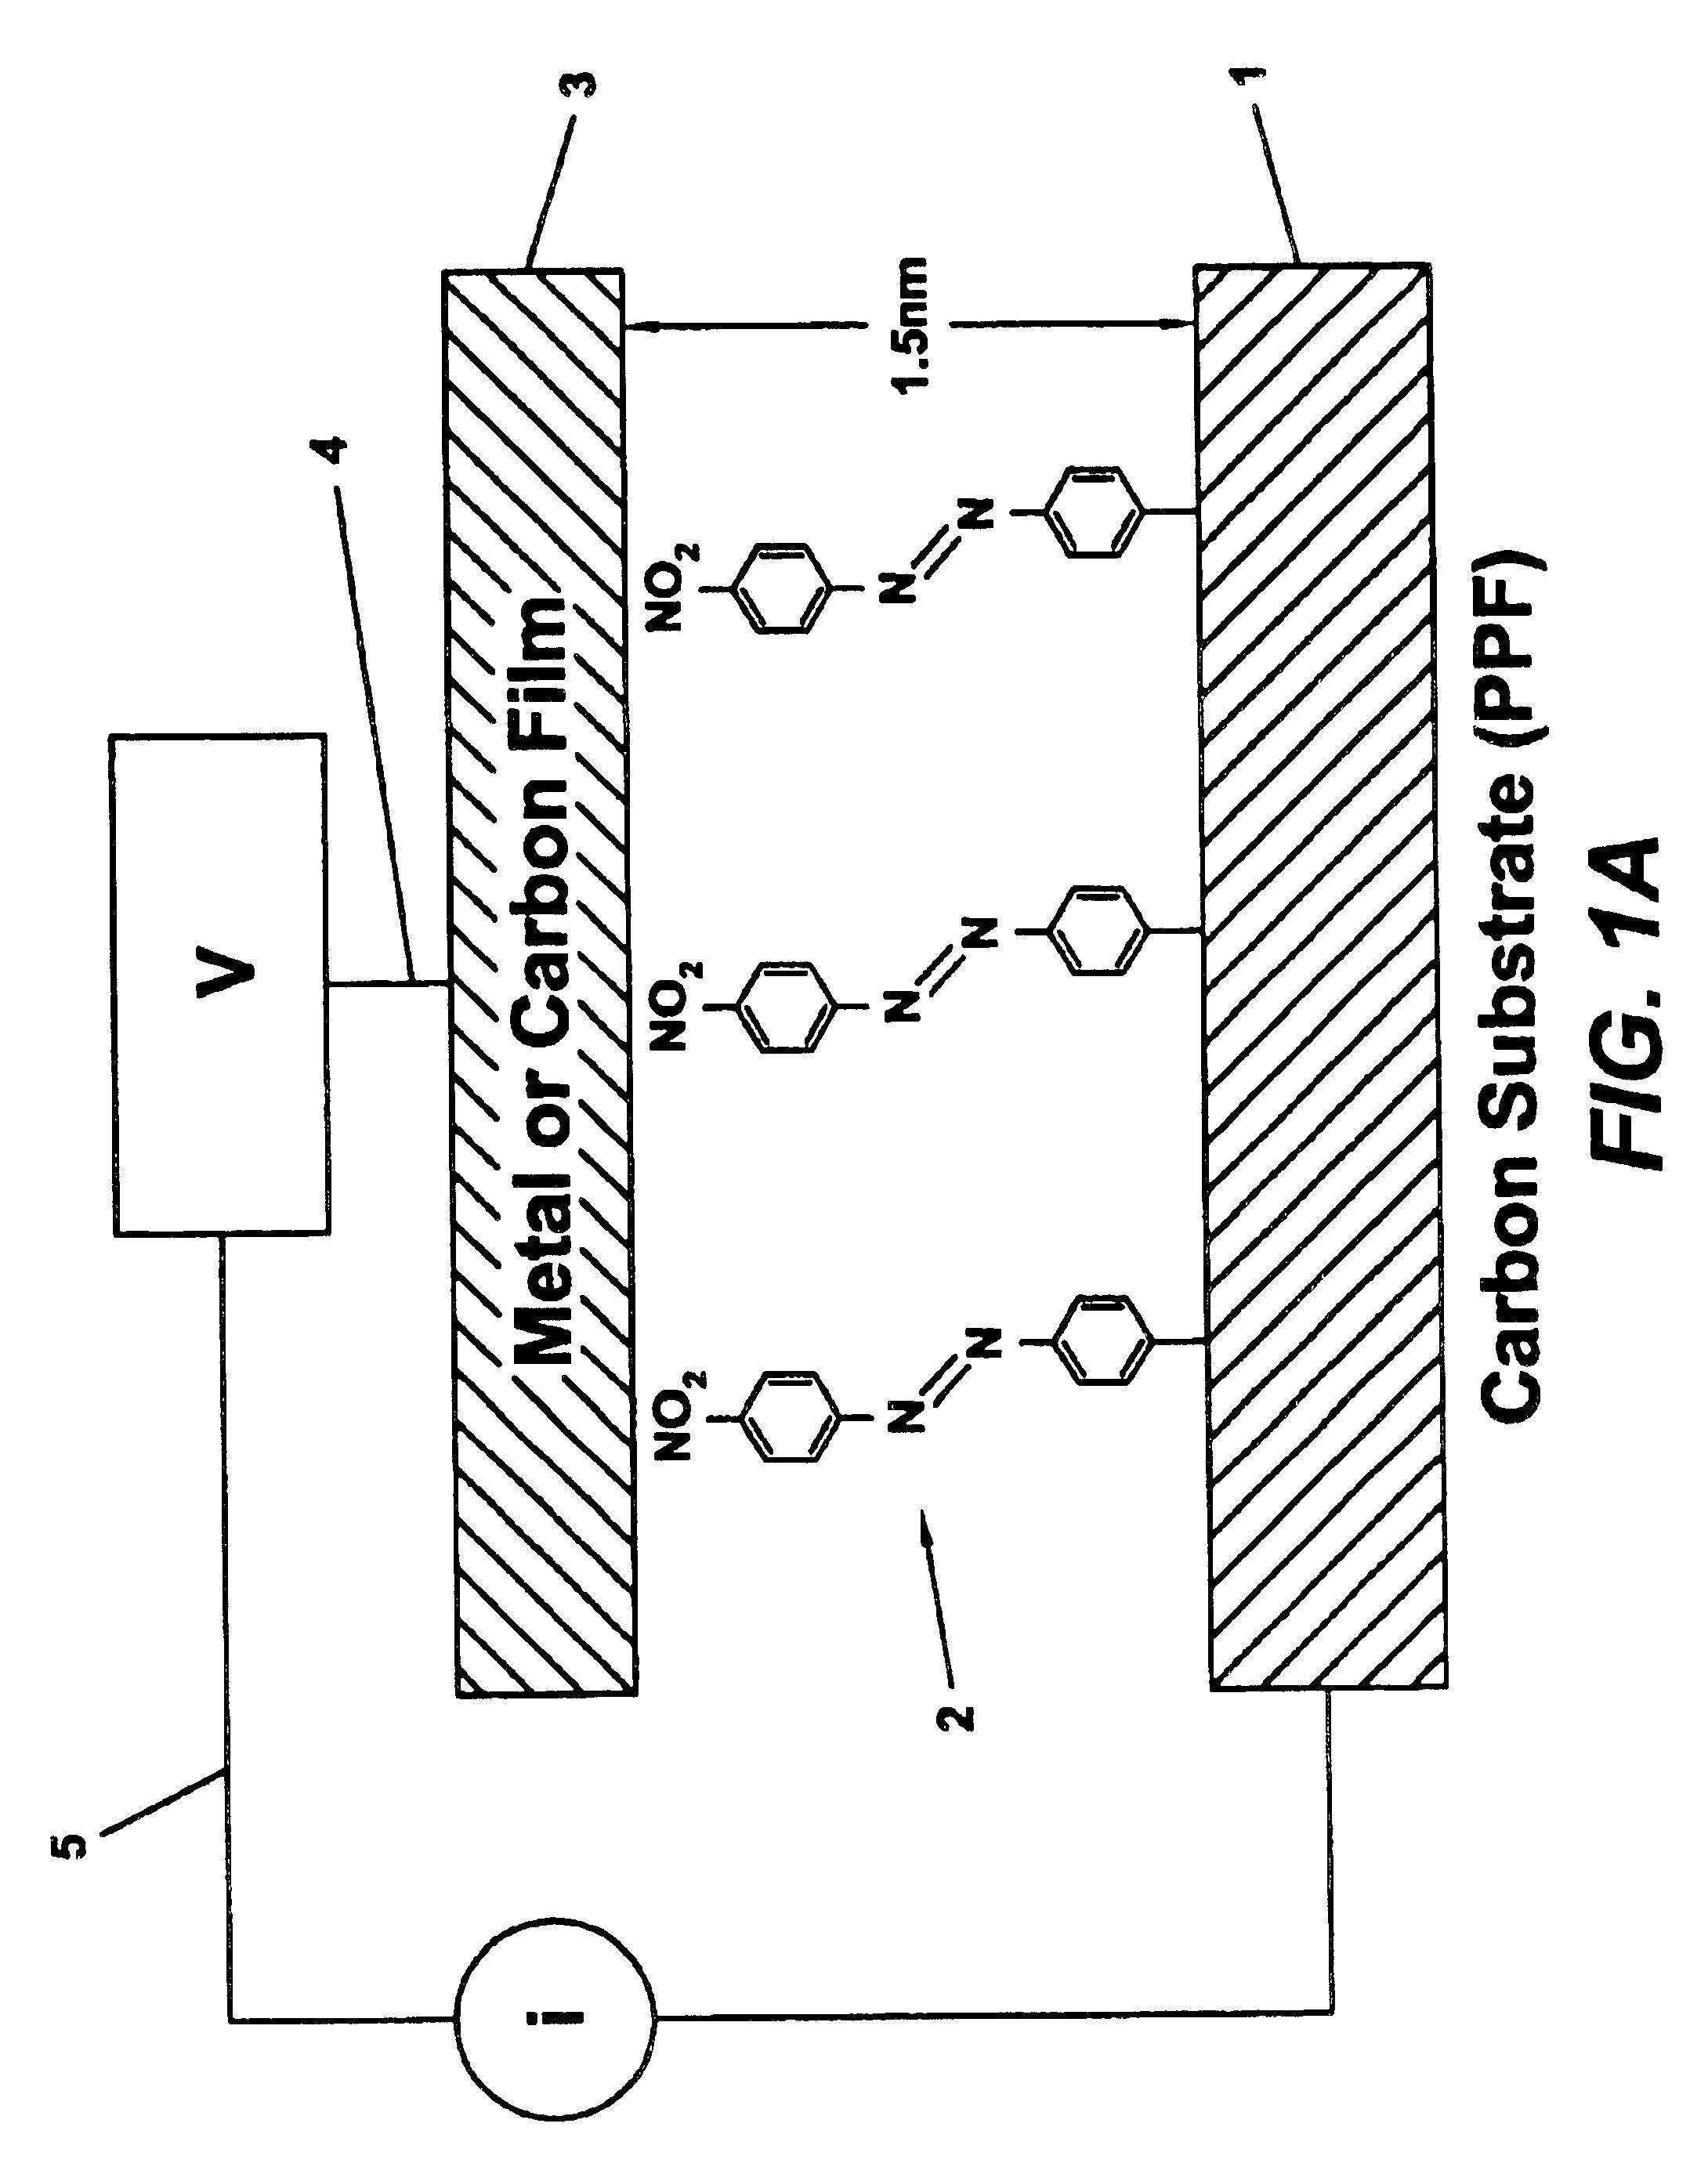 Chemical monolayer memory device